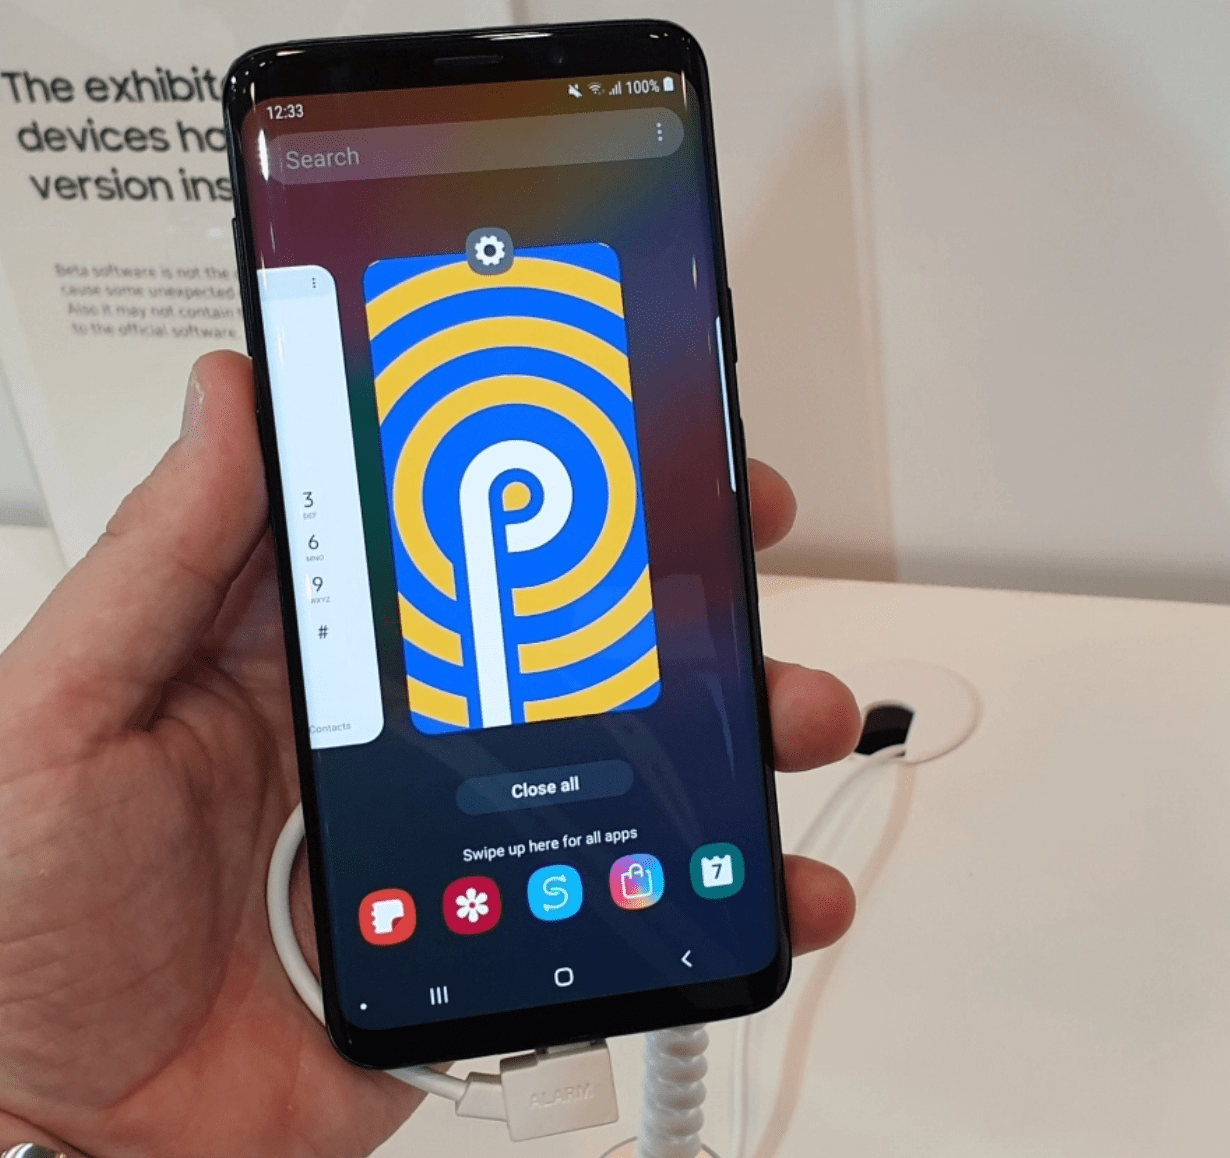 Samsung Galaxy S8 ve Galaxy S8 Plus Android Pie